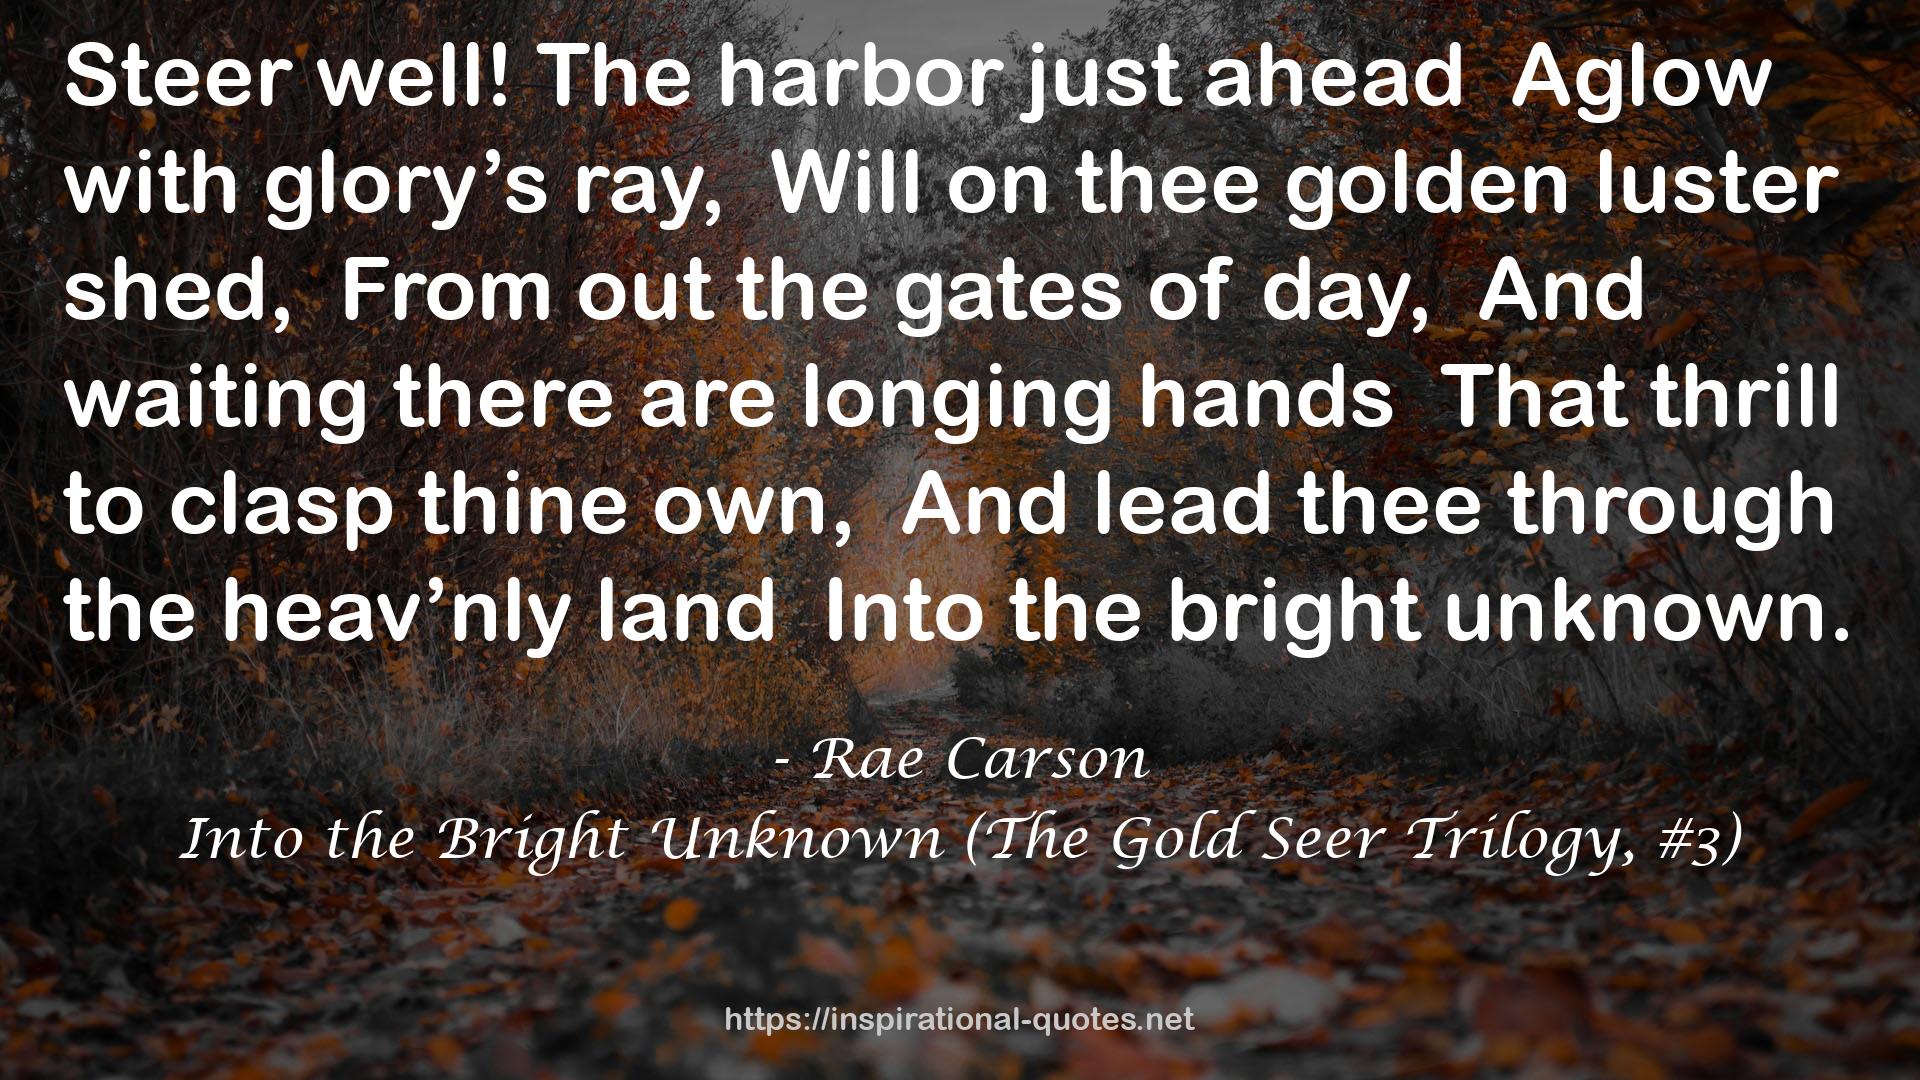 Into the Bright Unknown (The Gold Seer Trilogy, #3) QUOTES